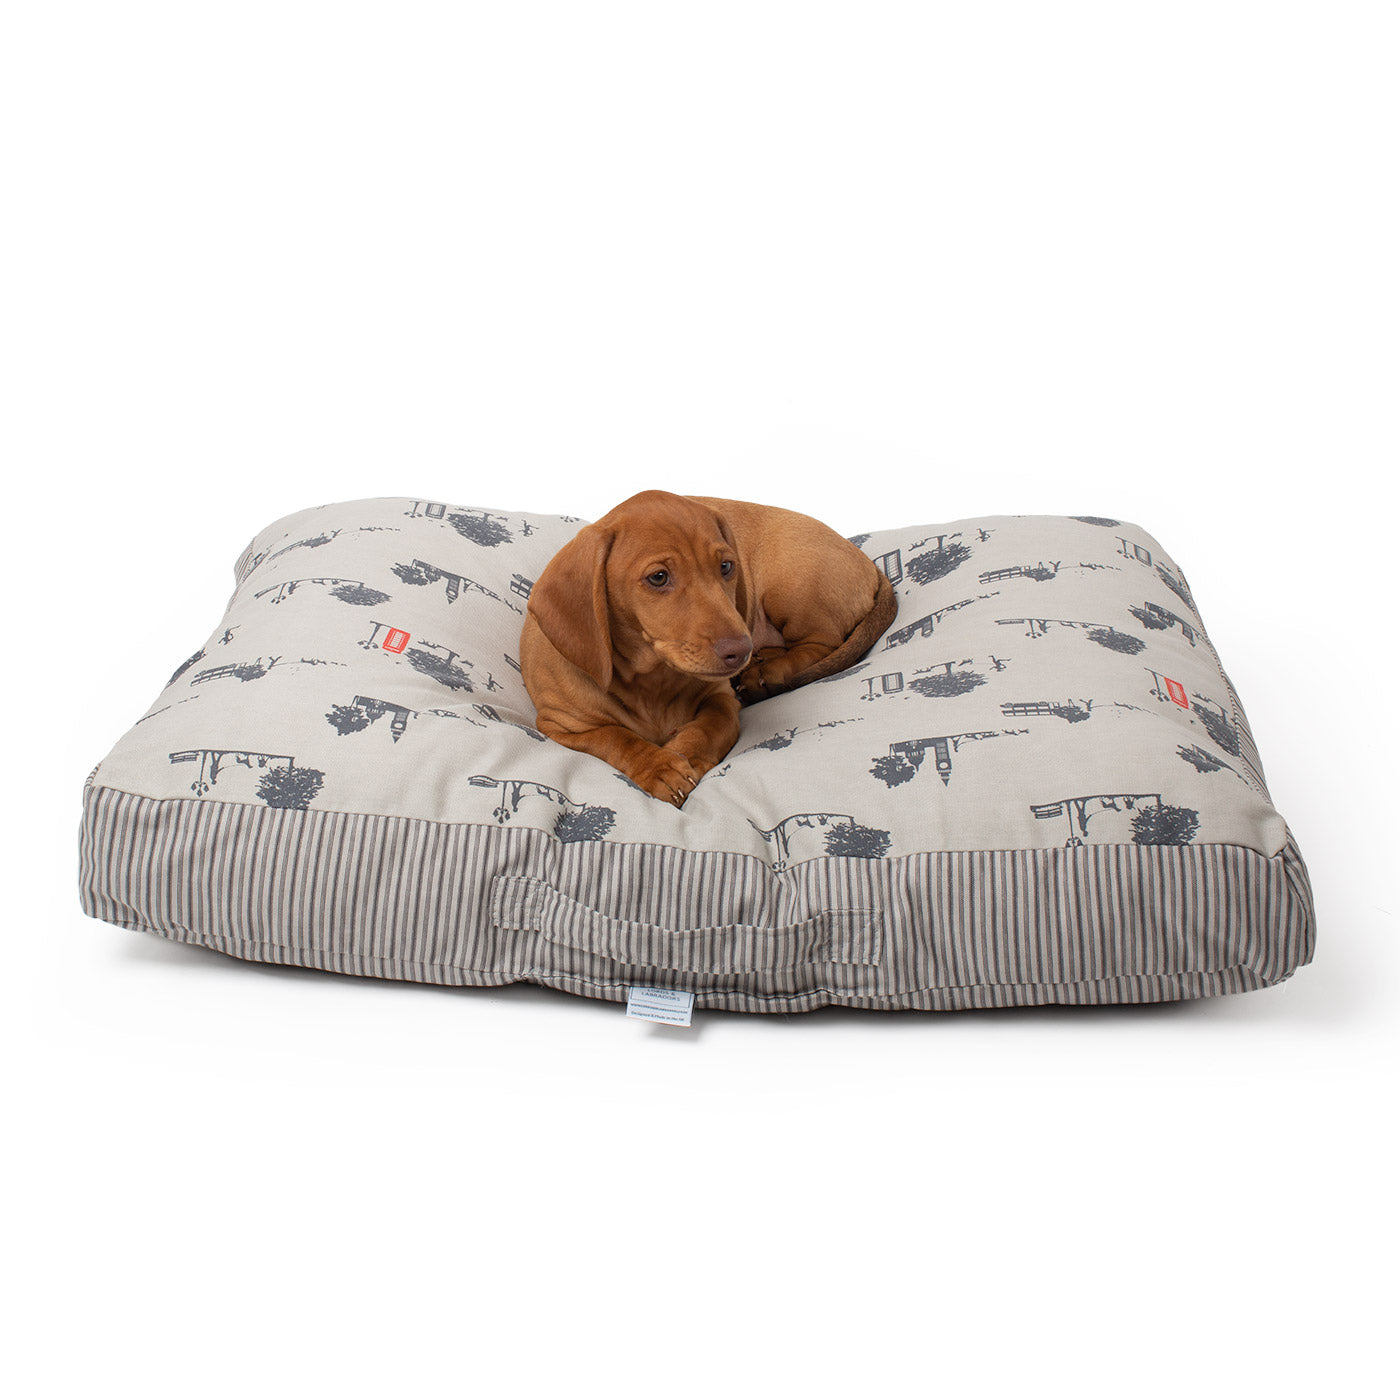 Sleepeze Dog Cushion in Hyde Park by Lords & Labradors